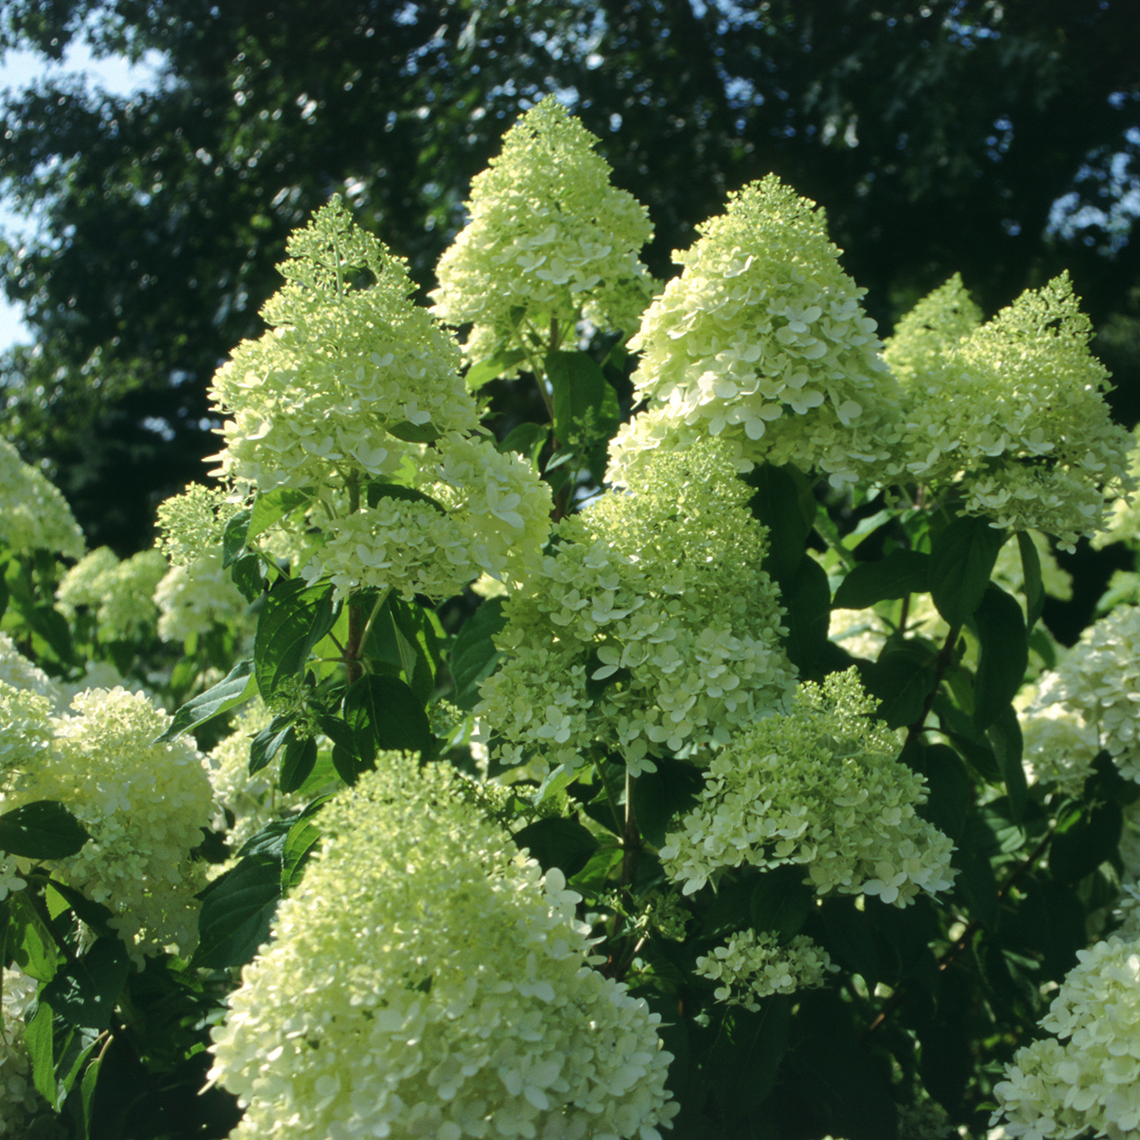 Closeup of the lime green blooms of Limelight hydrangea